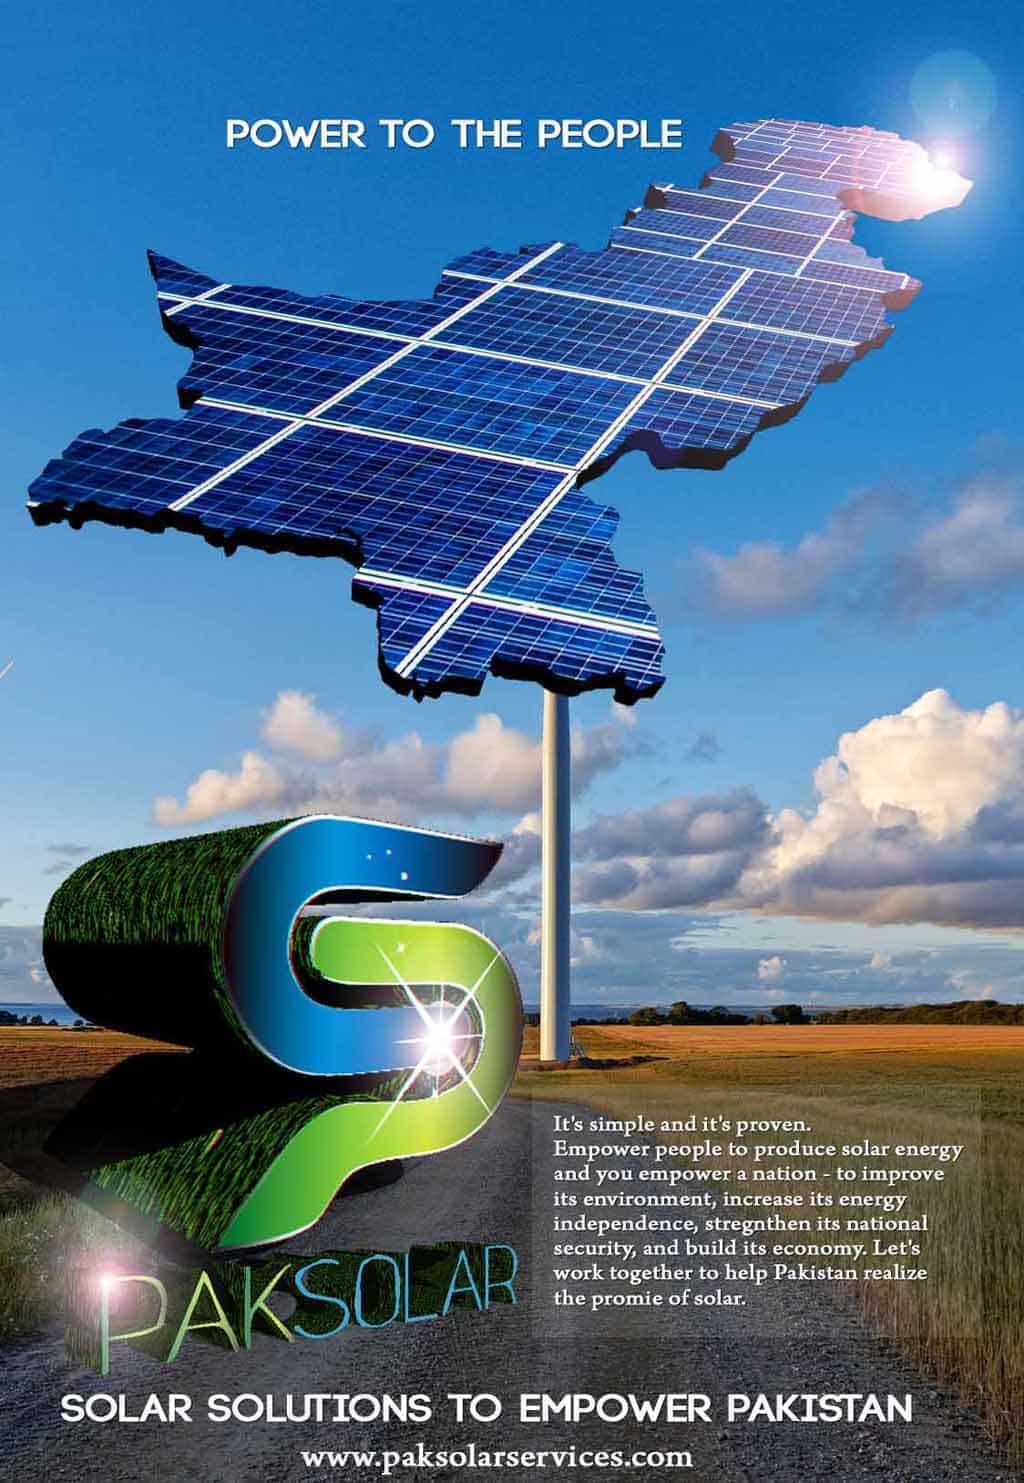 RESIDENTIAL, COMMERCIAL, & INDUSTRIAL SOLAR PAKSOLAR Energy Solution Company in Karachi based, provide solutions across Pakistan, specializes in Solar Energy System - Residential Solar & Commercial Solar